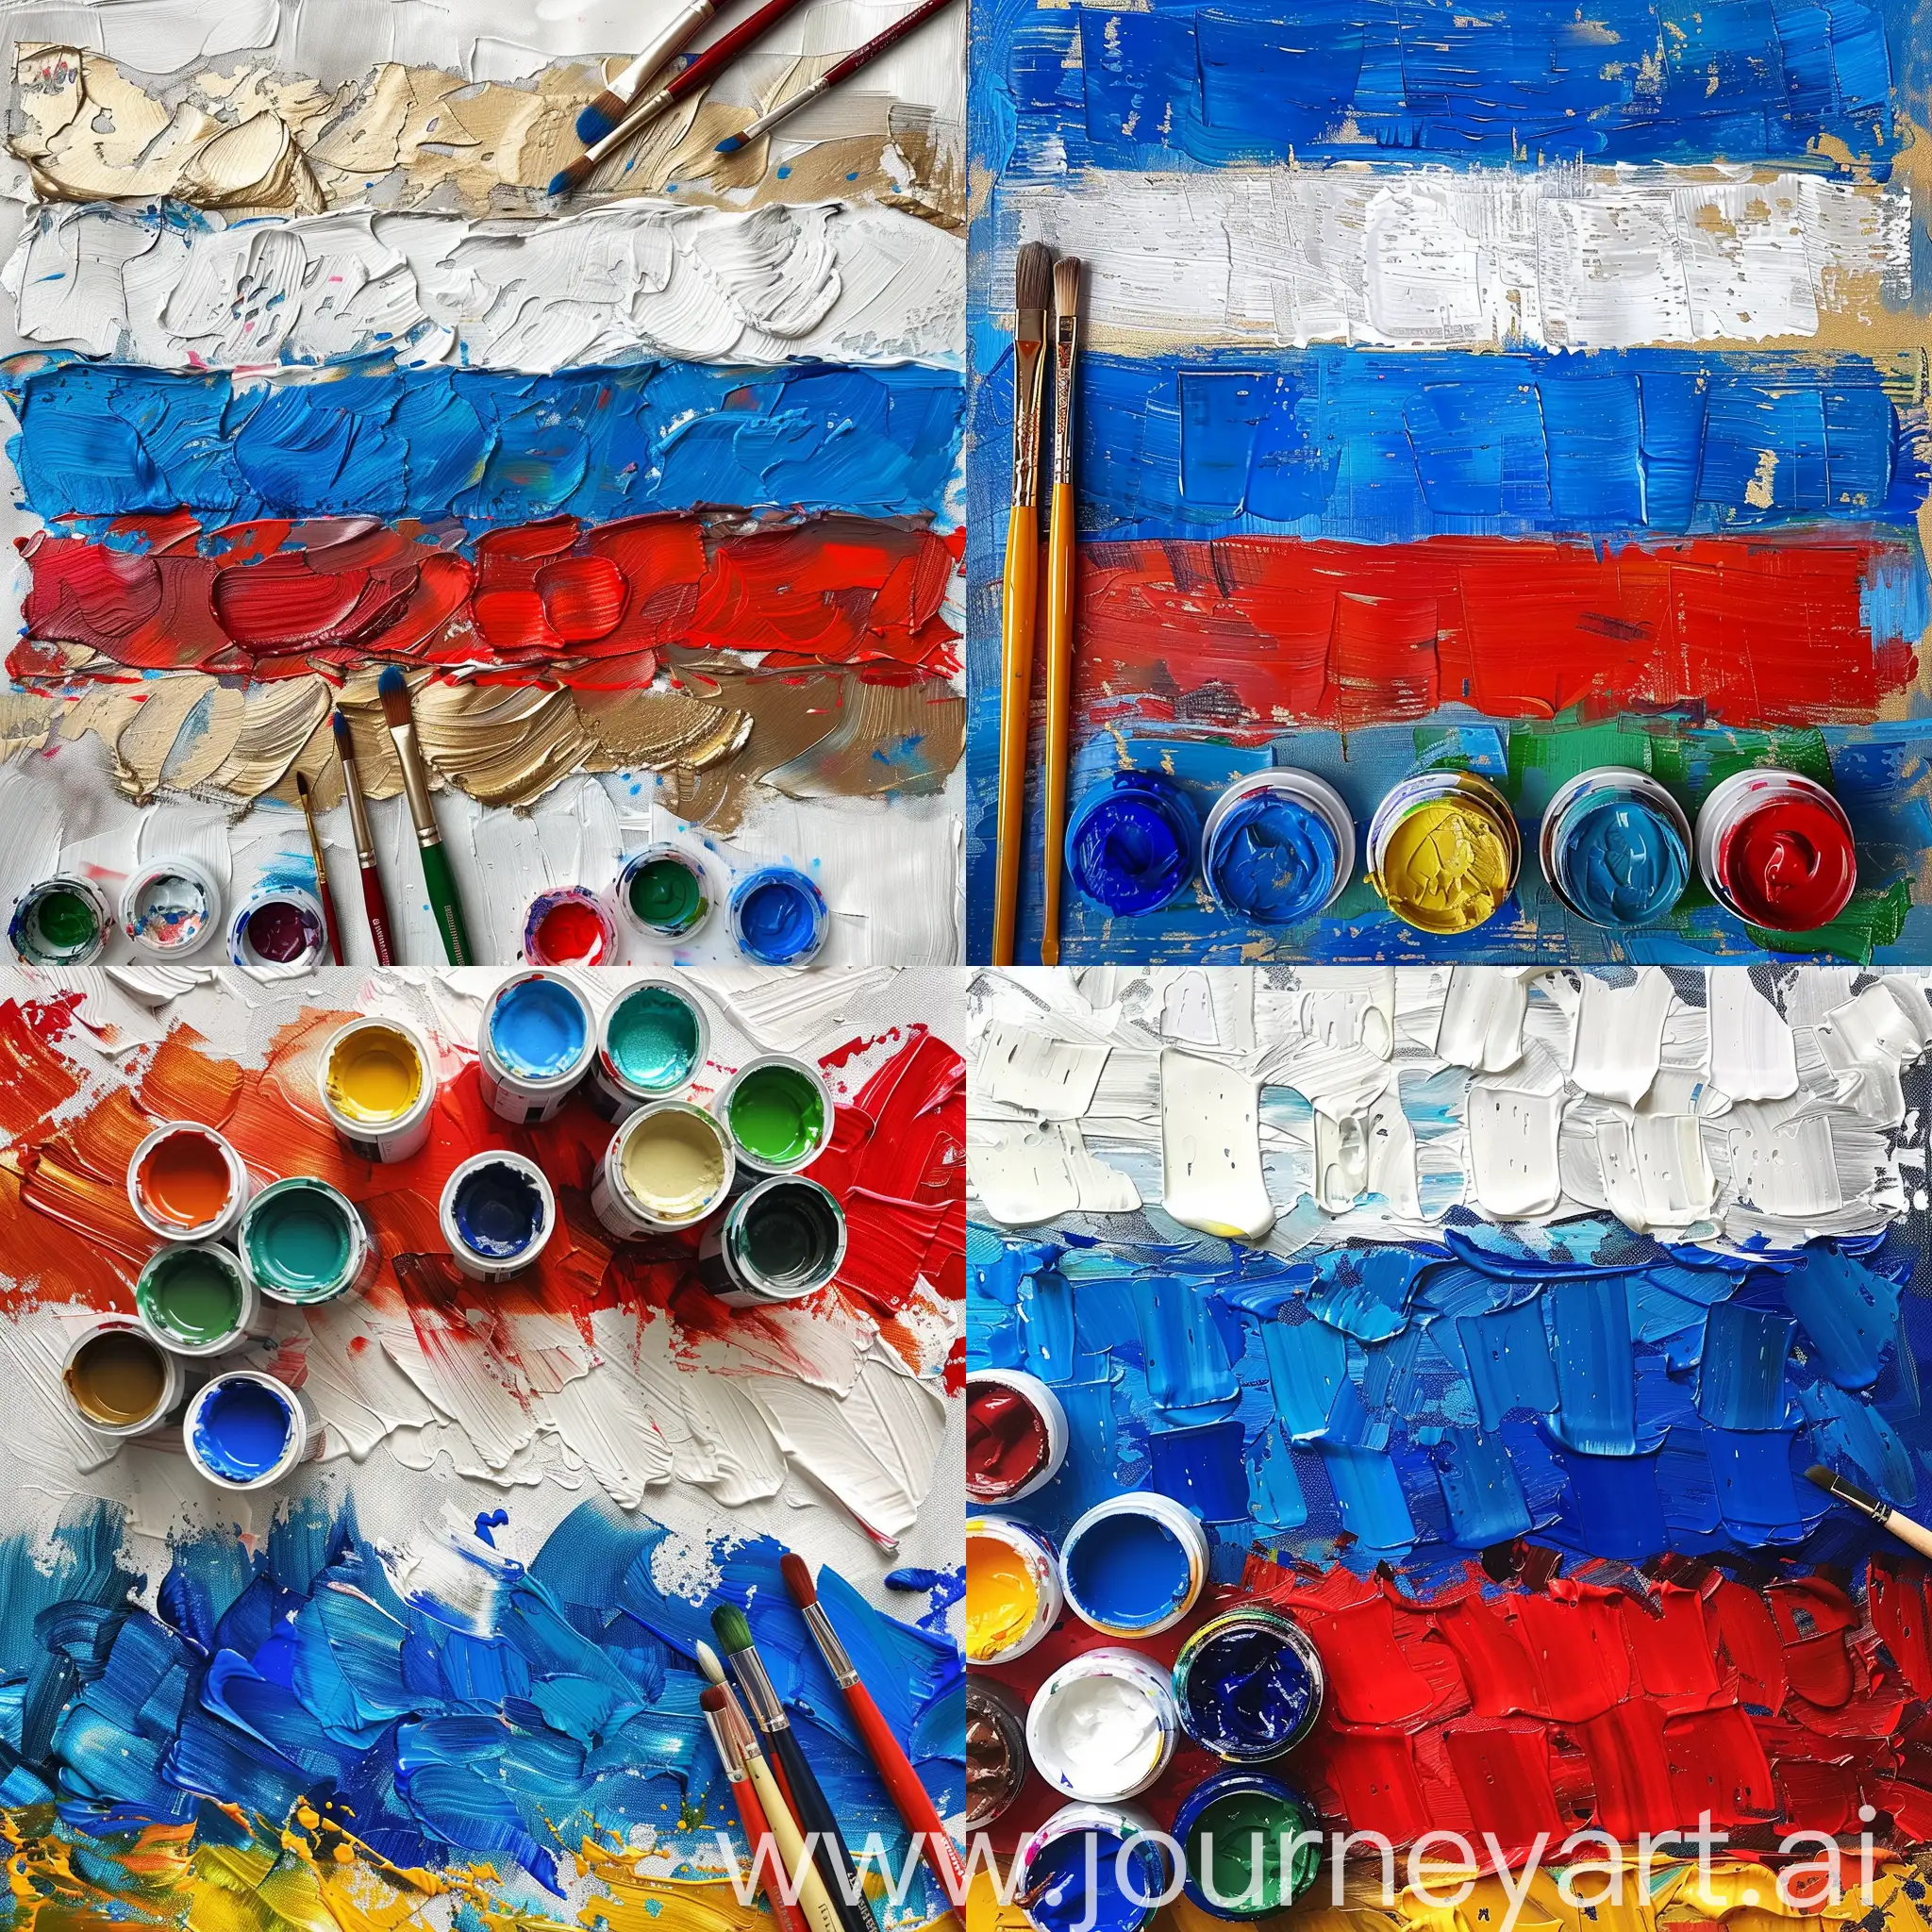 Vibrant-Painting-of-the-Russian-Flag-Patriotic-Artwork-in-Bold-Colors